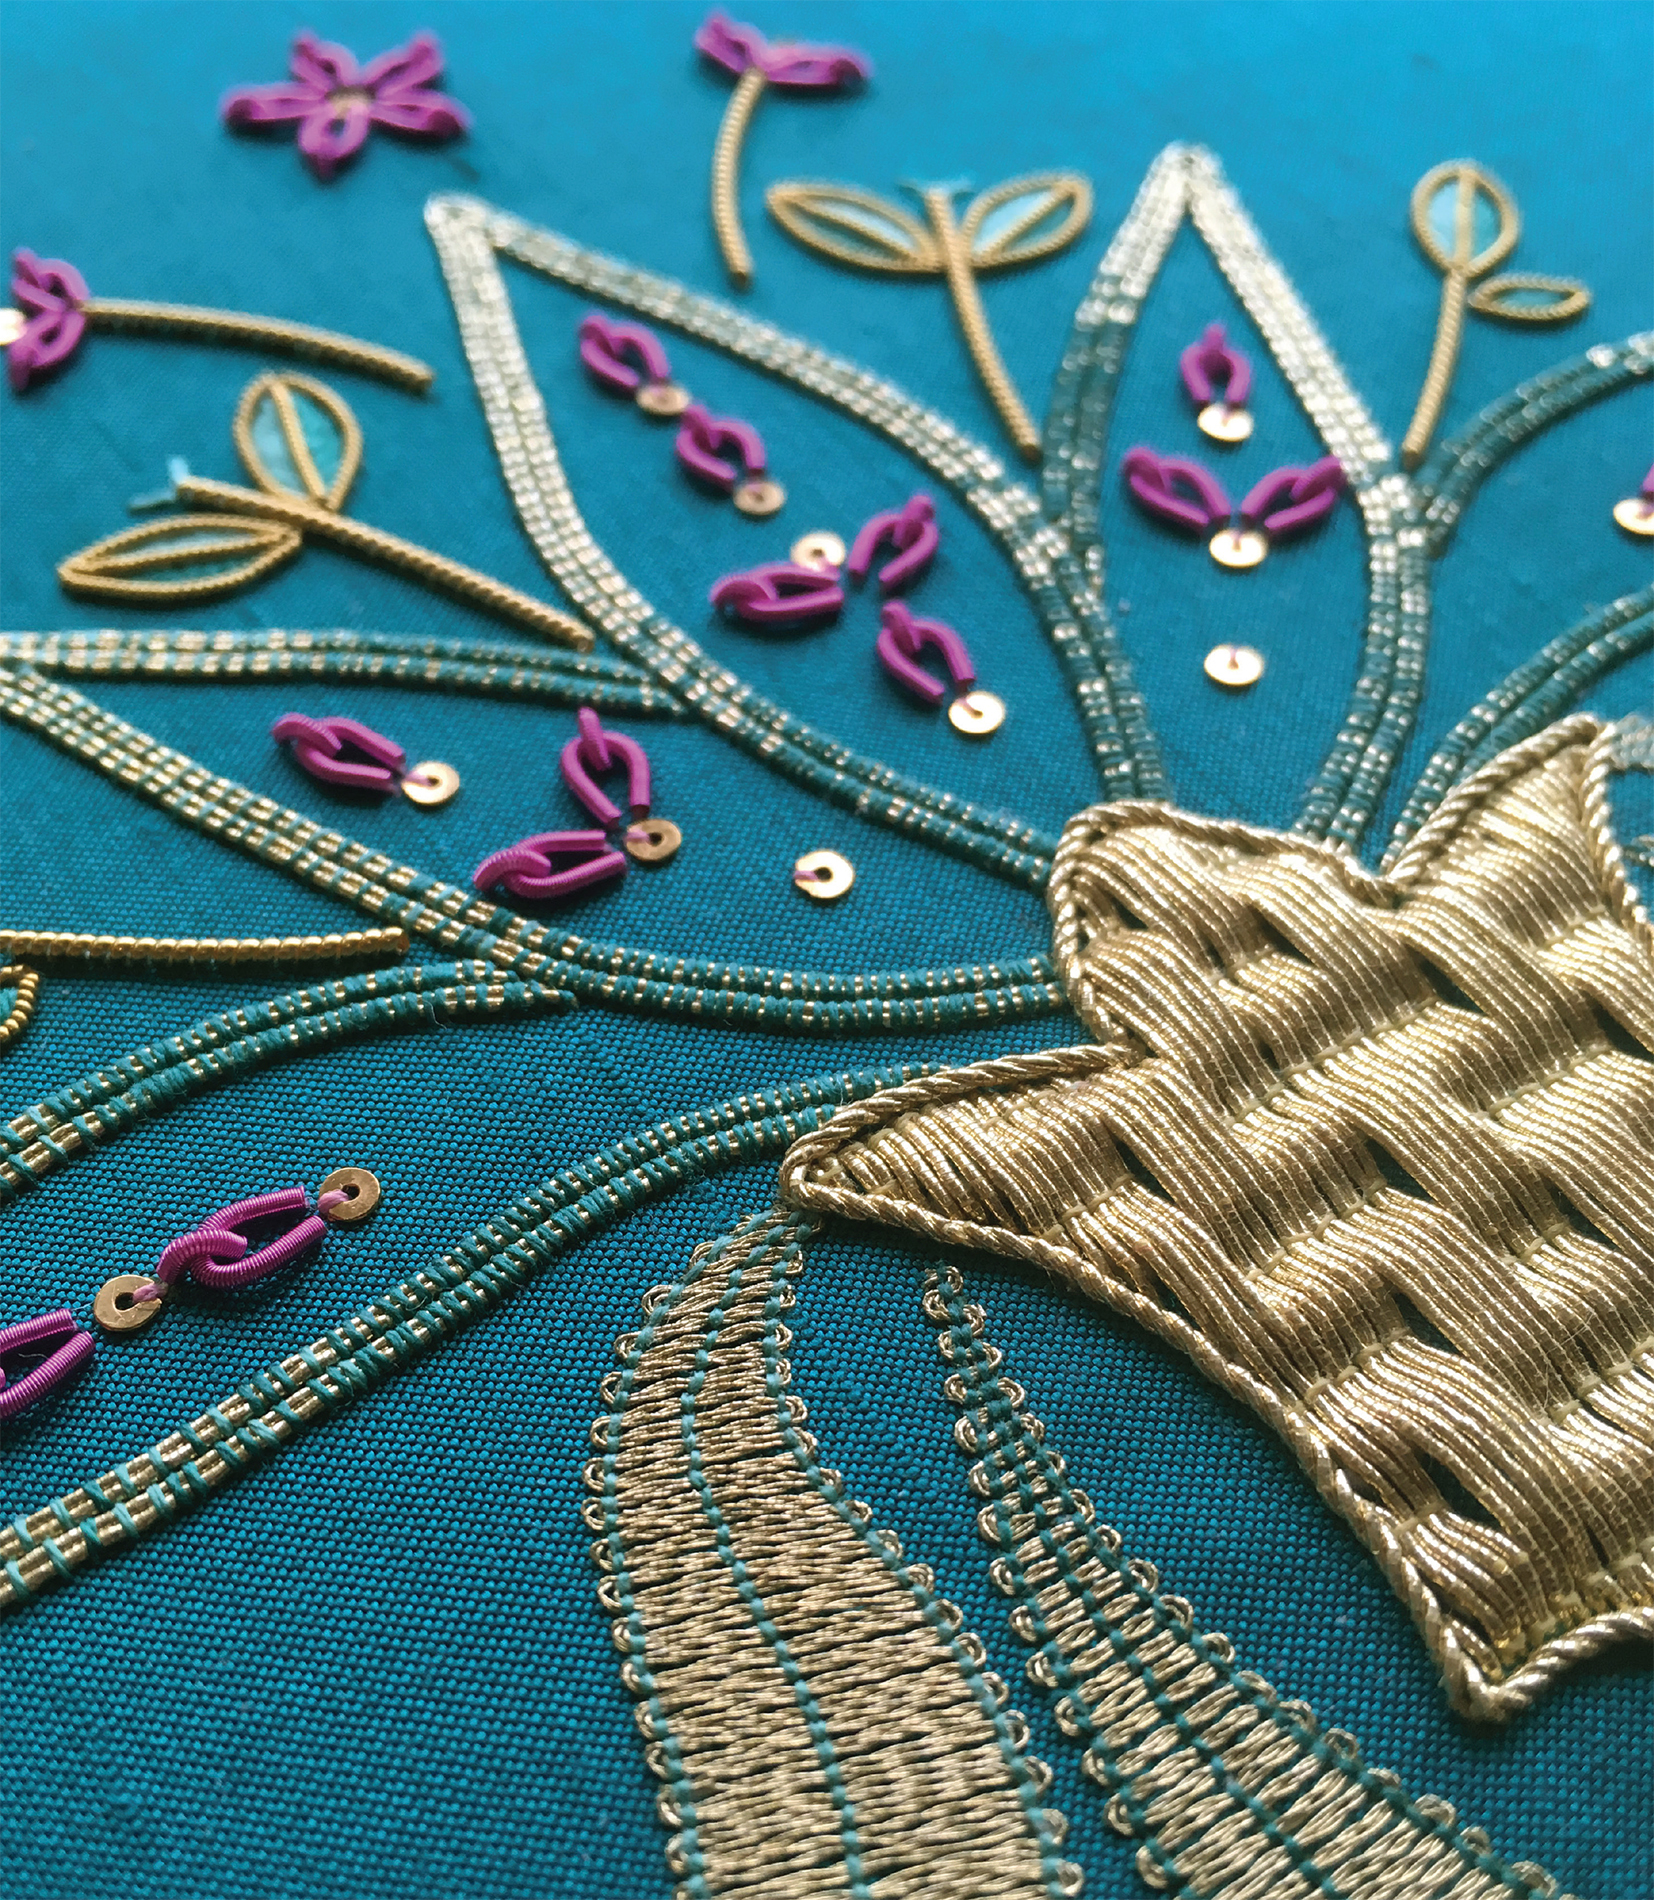 Goldwork Embroidery Techniques and Projects - image 2